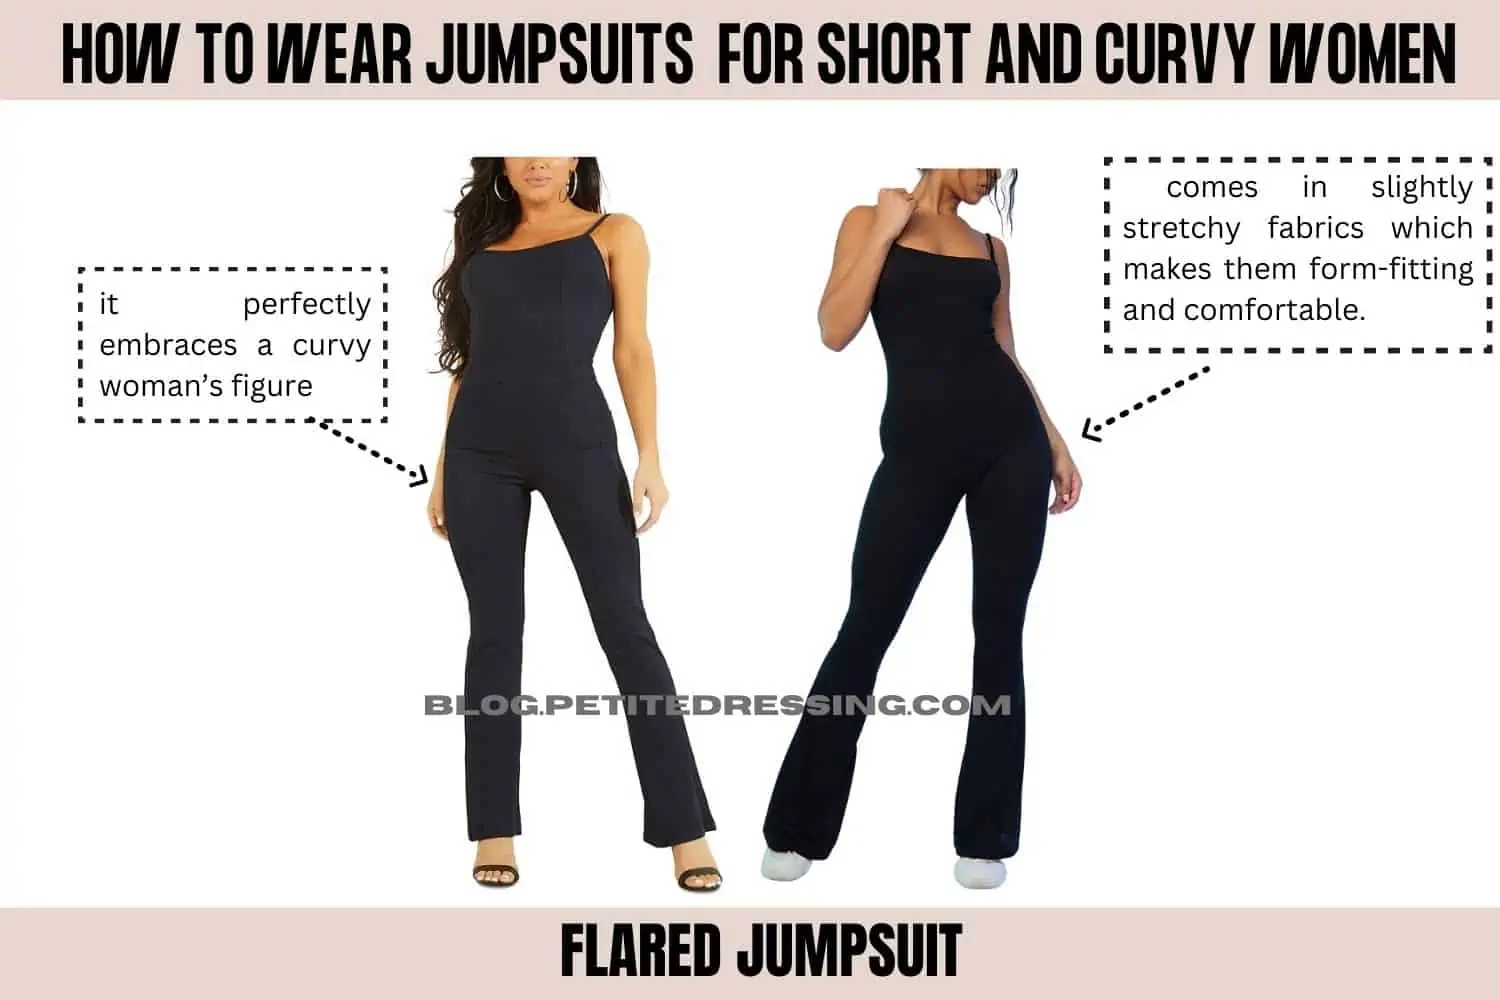 What are jumpsuits? - Quora